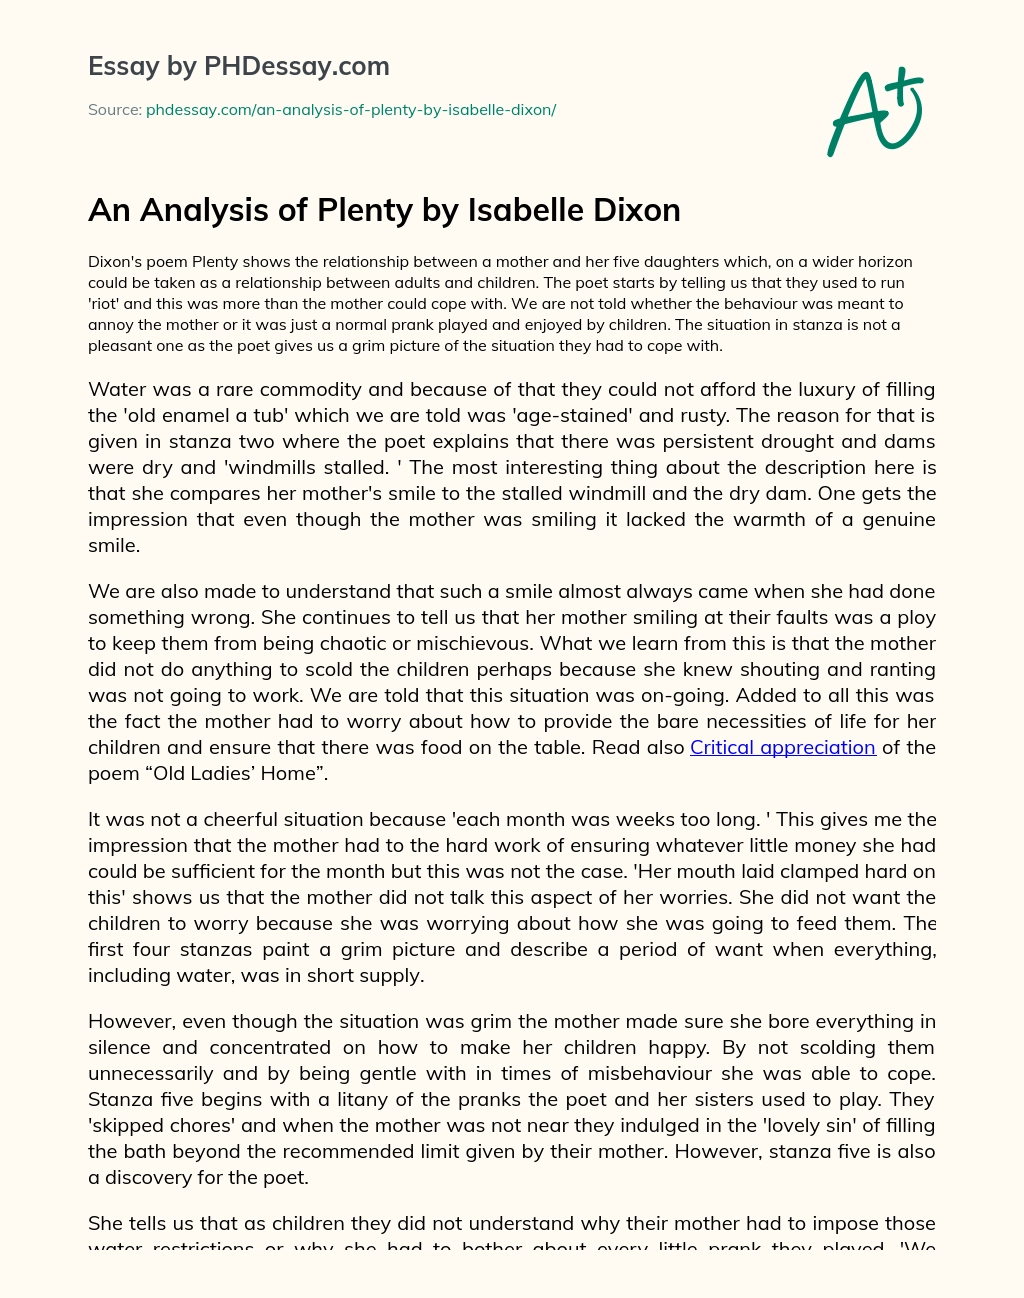 An Analysis of Plenty by Isabelle Dixon essay